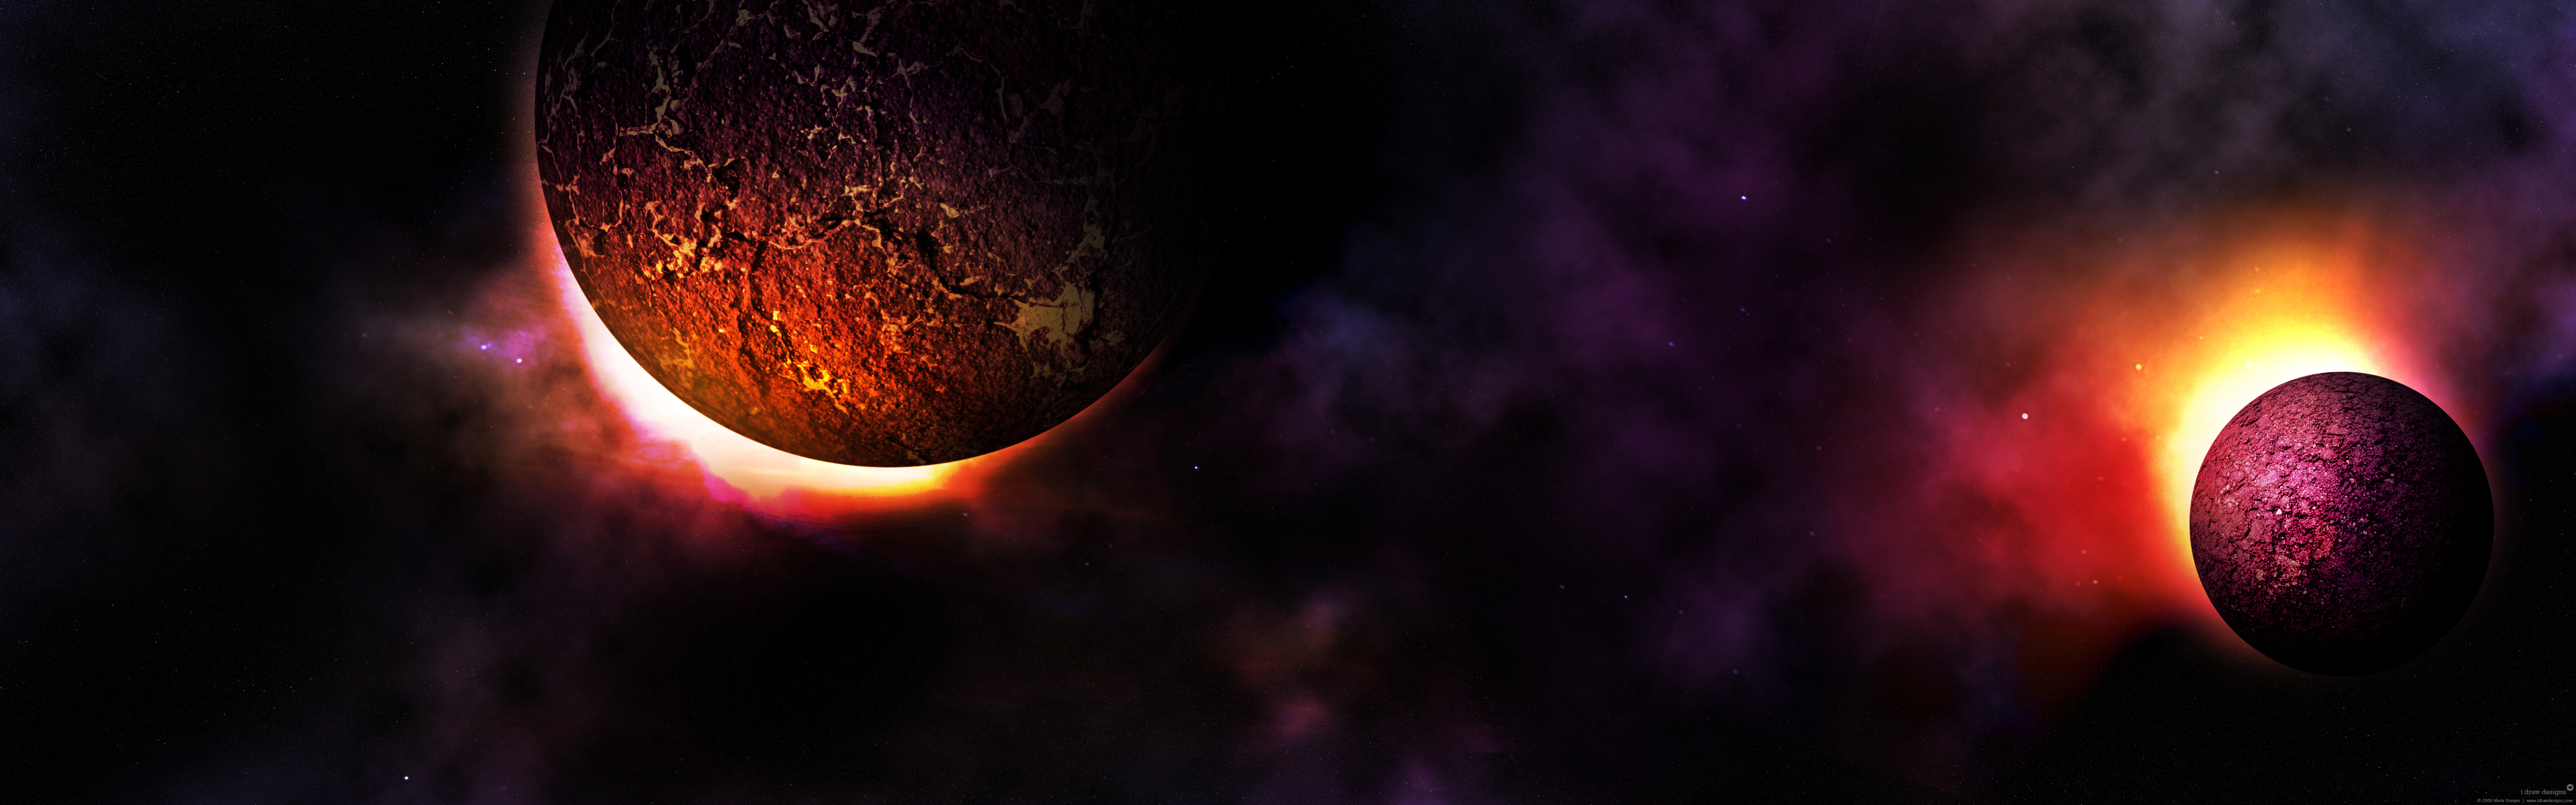 1080p dual monitor wallpaper,outer space,atmosphere,astronomical object,universe,sky